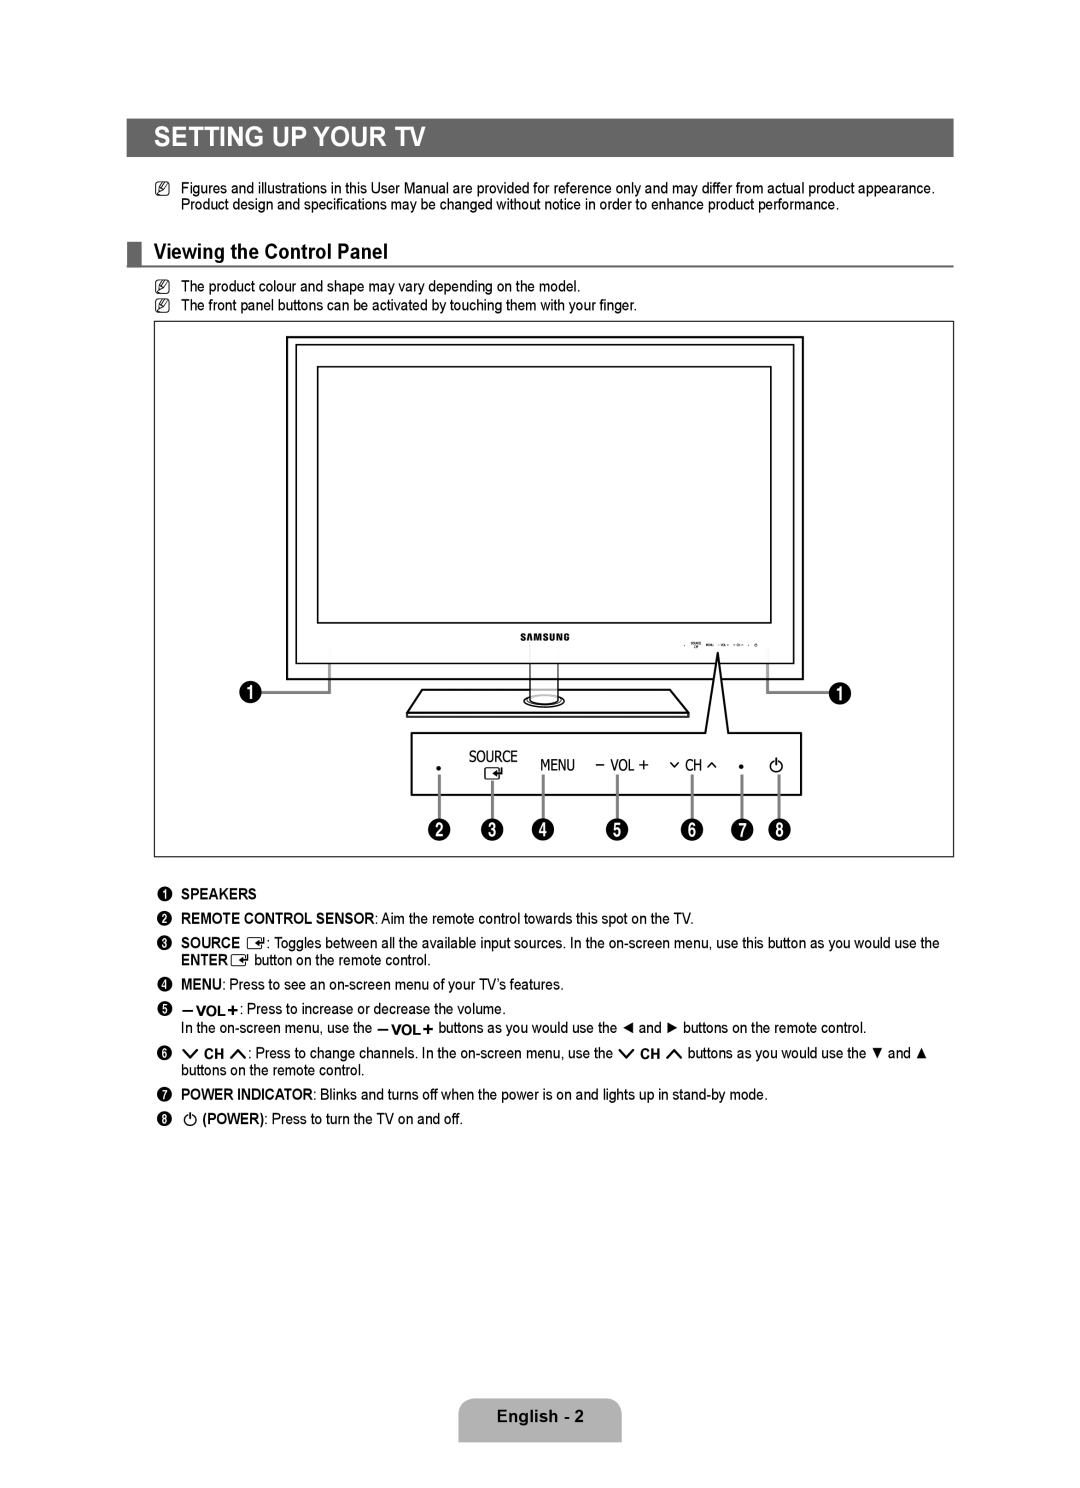 Samsung LA46B750U1R, LA52B750U1R Setting Up Your Tv, Viewing the Control Panel, Speakers, 2 3 4 5 6 7, English -  